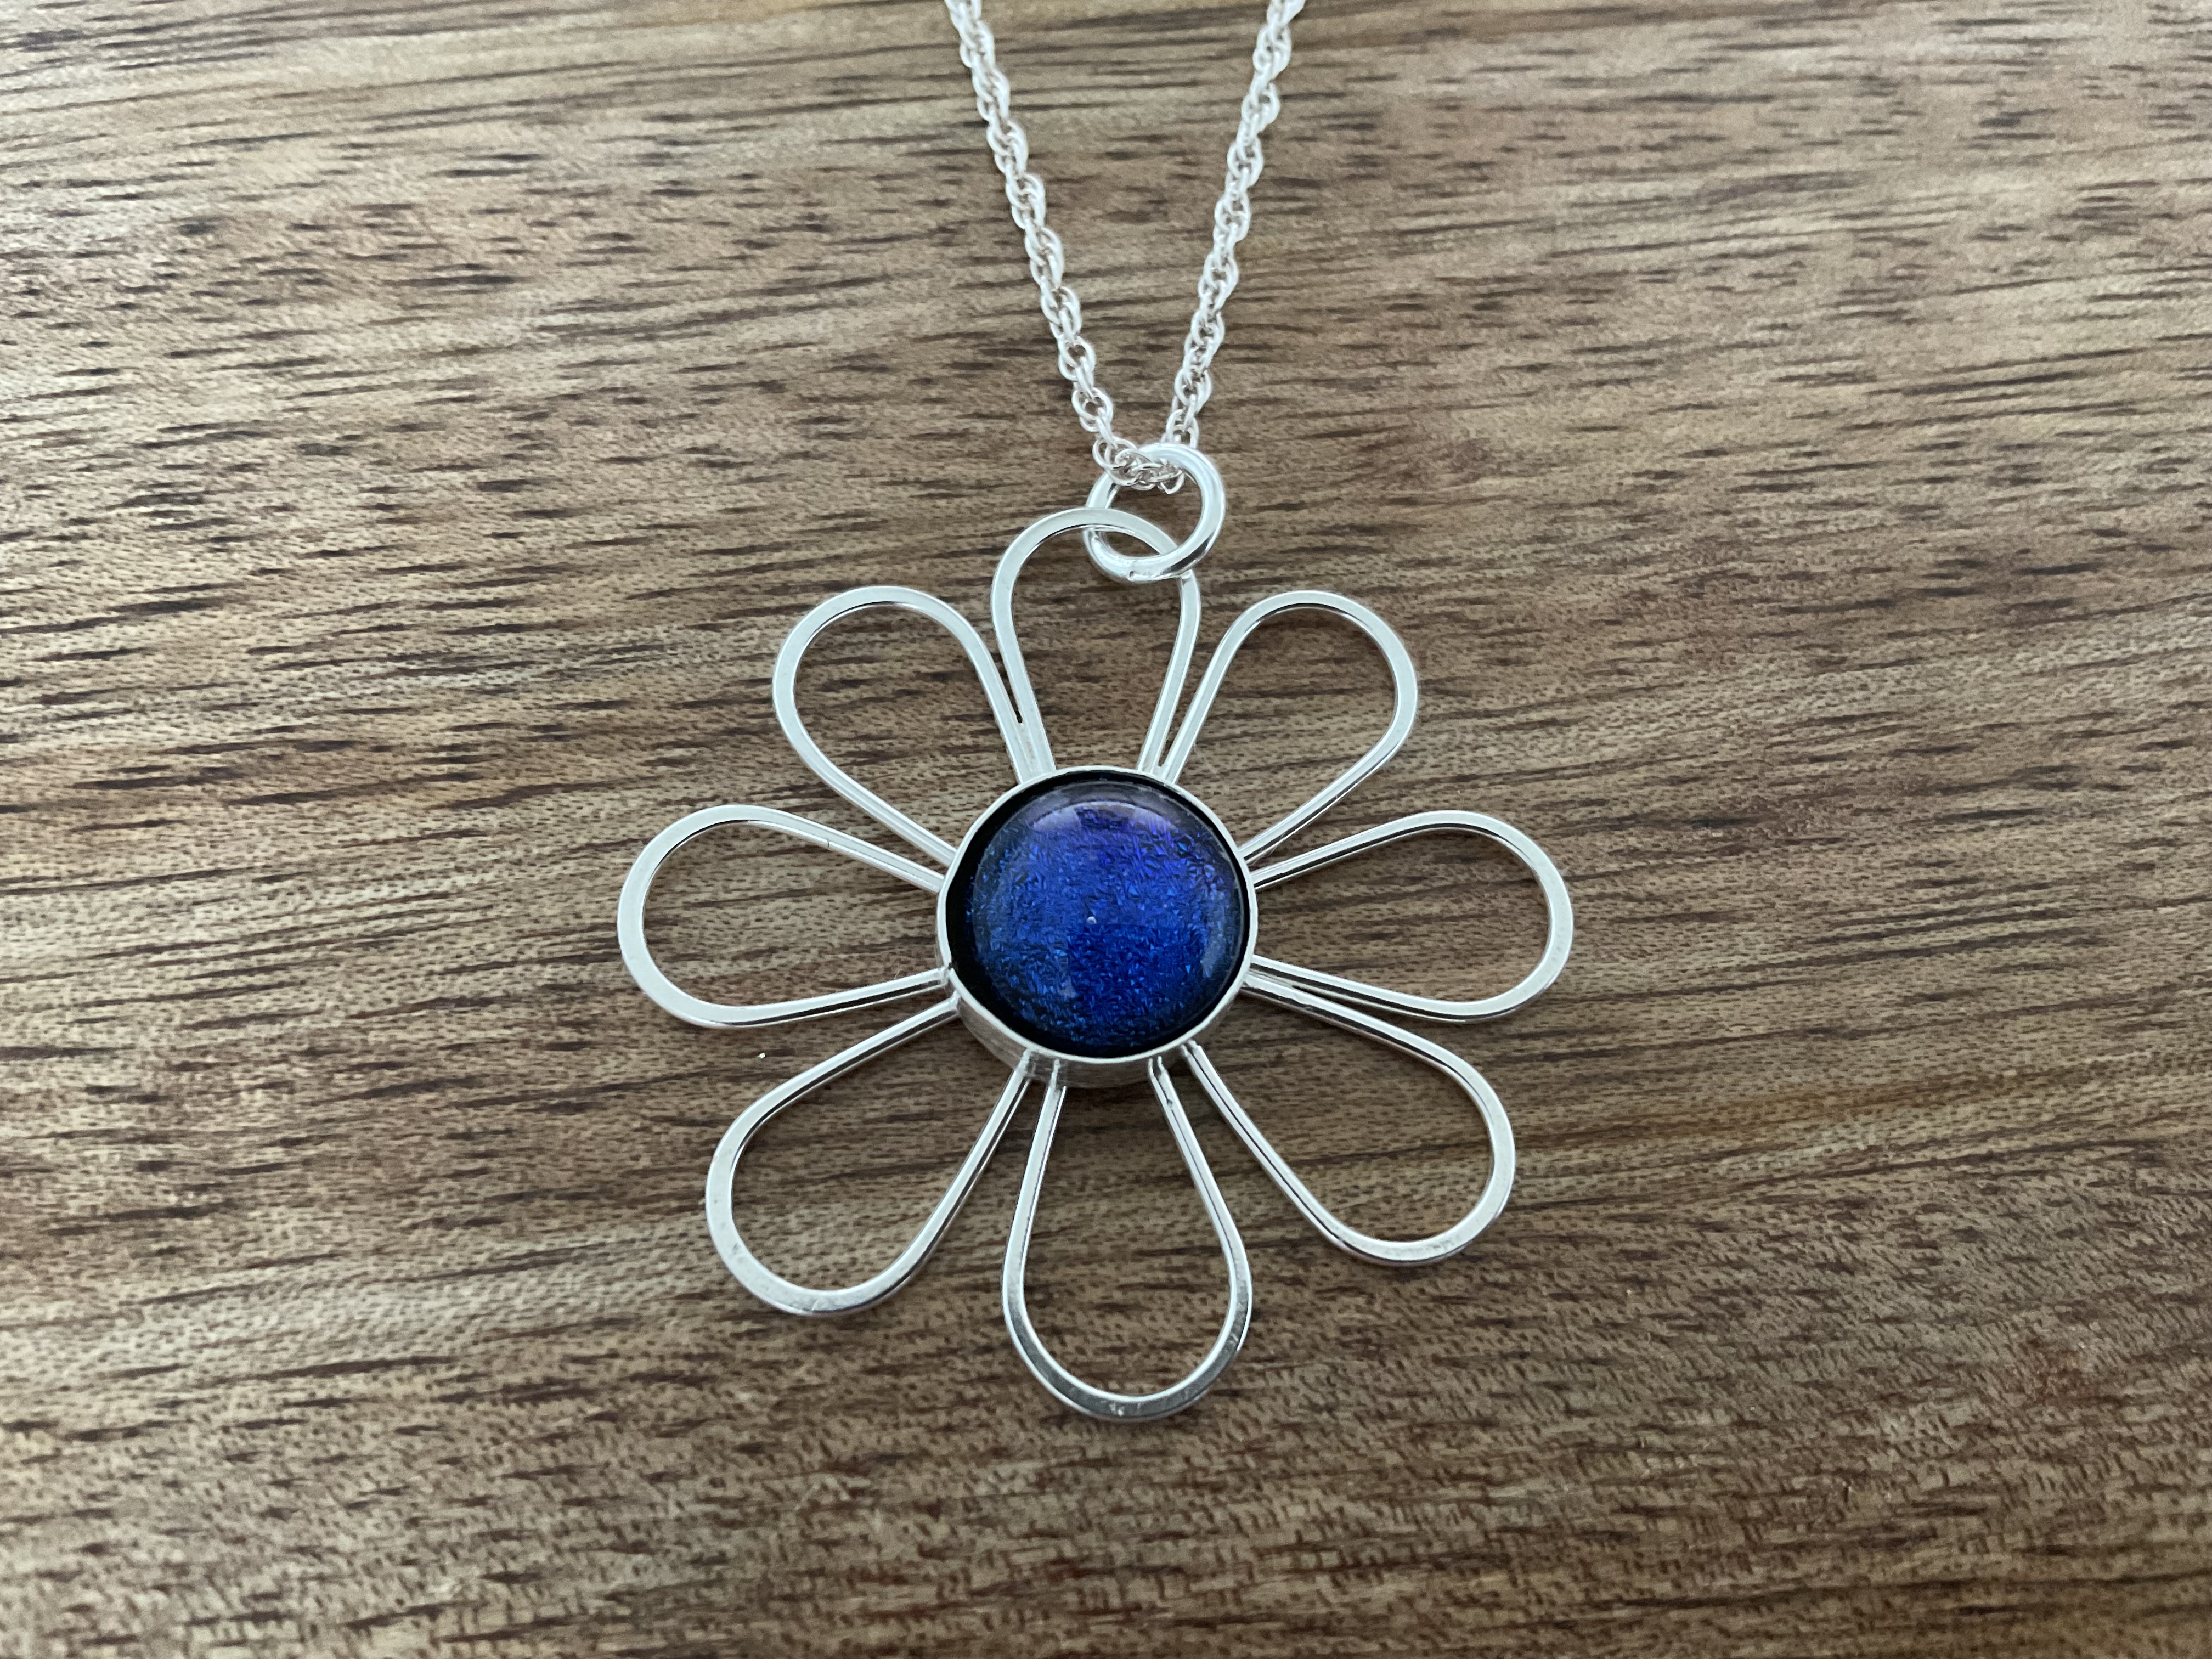 Blue Daisy Dichroic Fused Glass Pendant & Chain - Click Image to Close